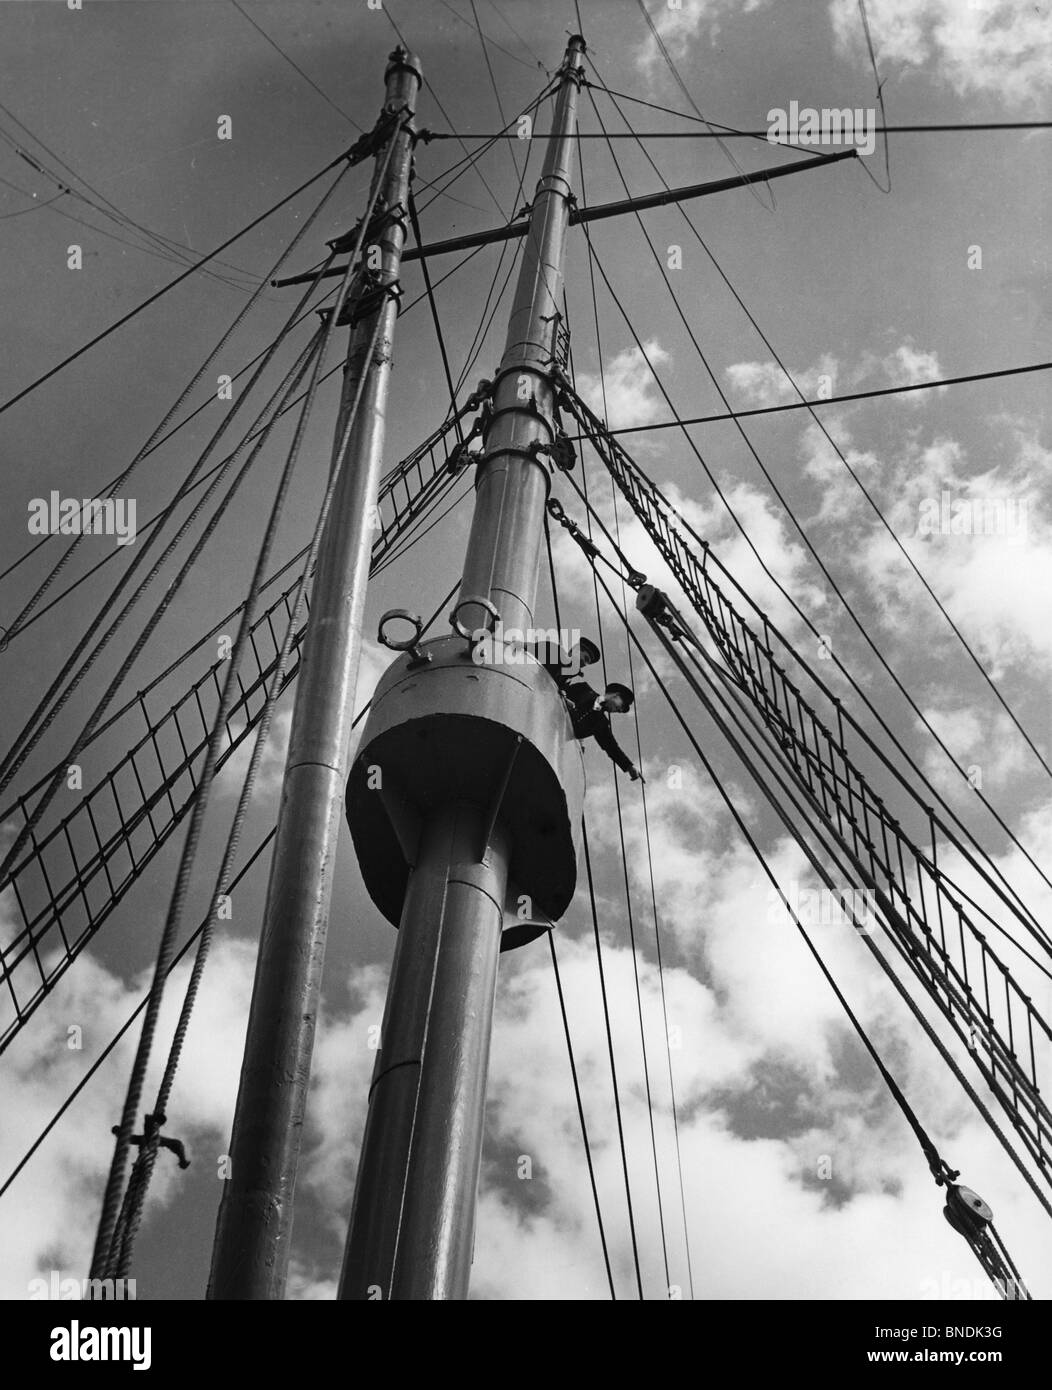 Low angle view of two masts of a military ship Stock Photo